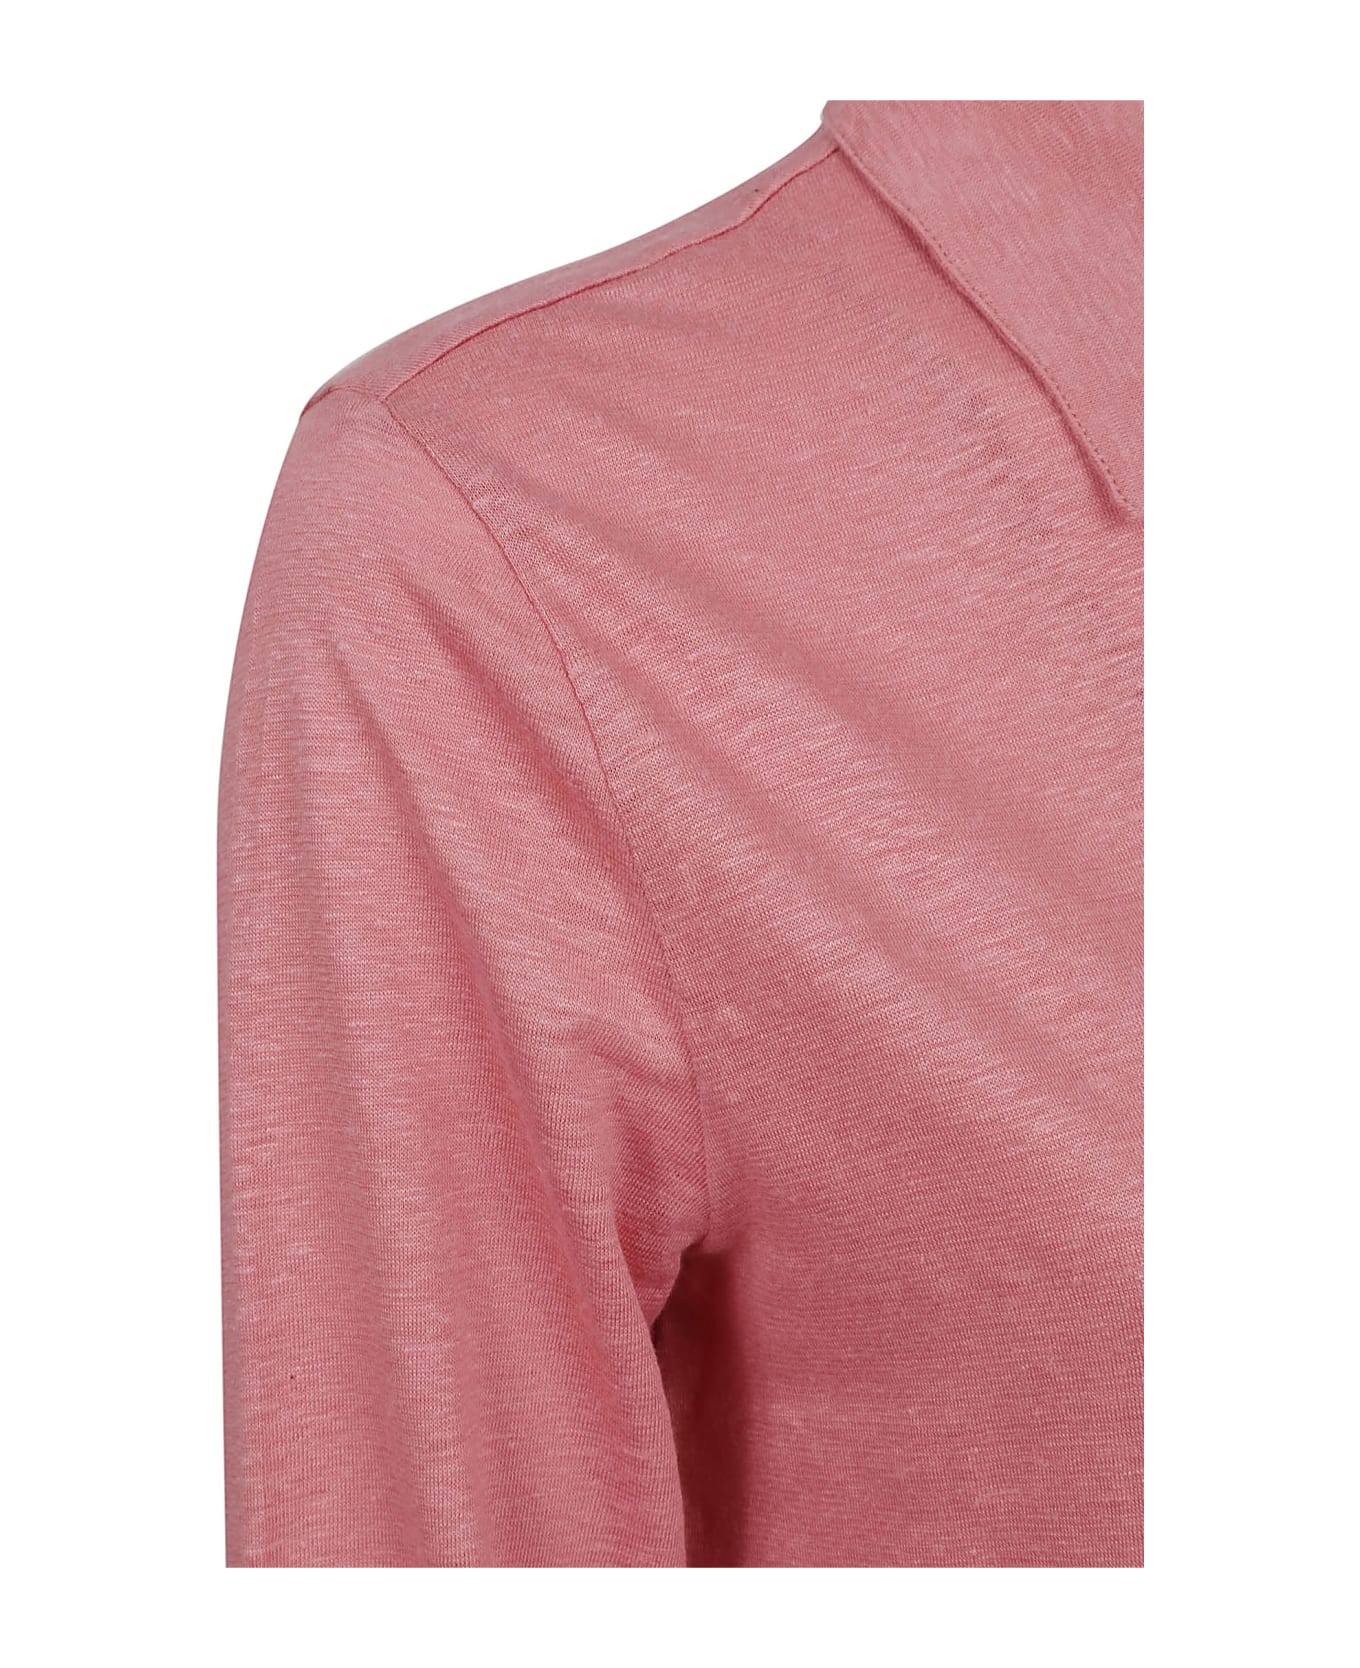 Majestic Filatures Majestic T-shirts And Polos Pink - Pink